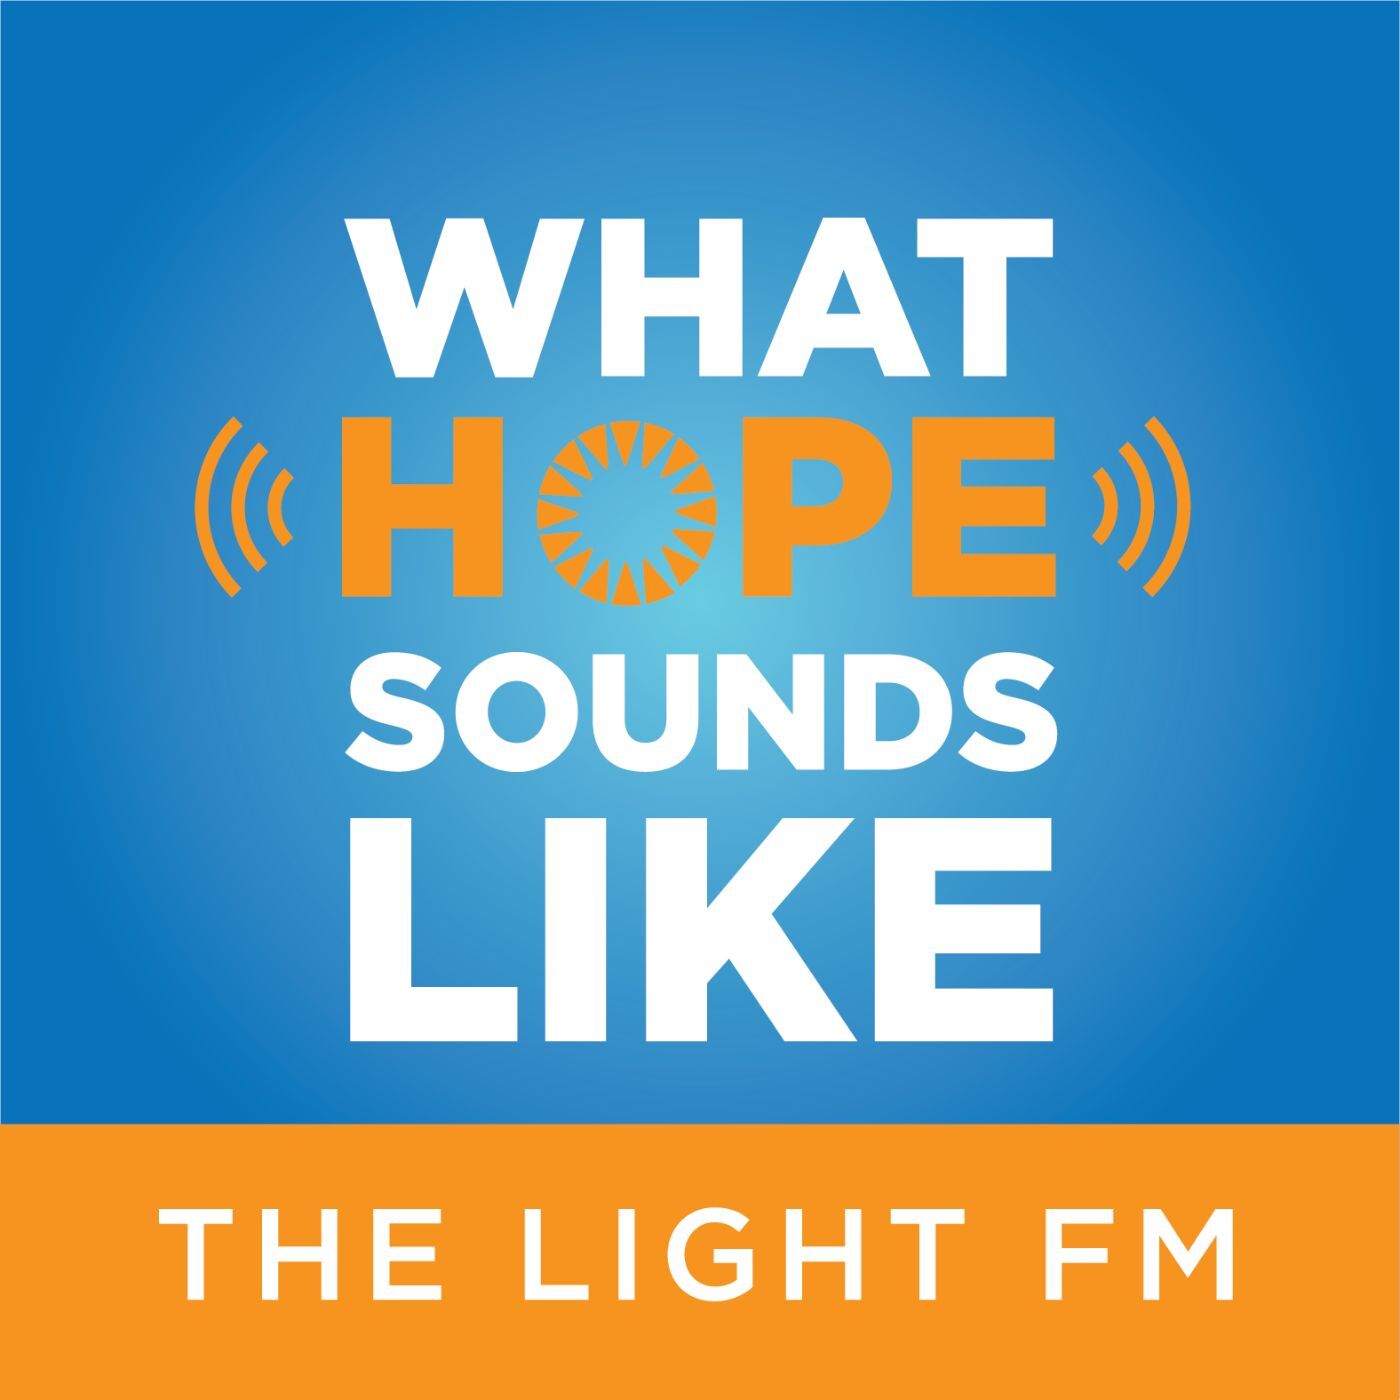 Faith, Radio, and New Beginnings: Jeff's Story at The Light FM